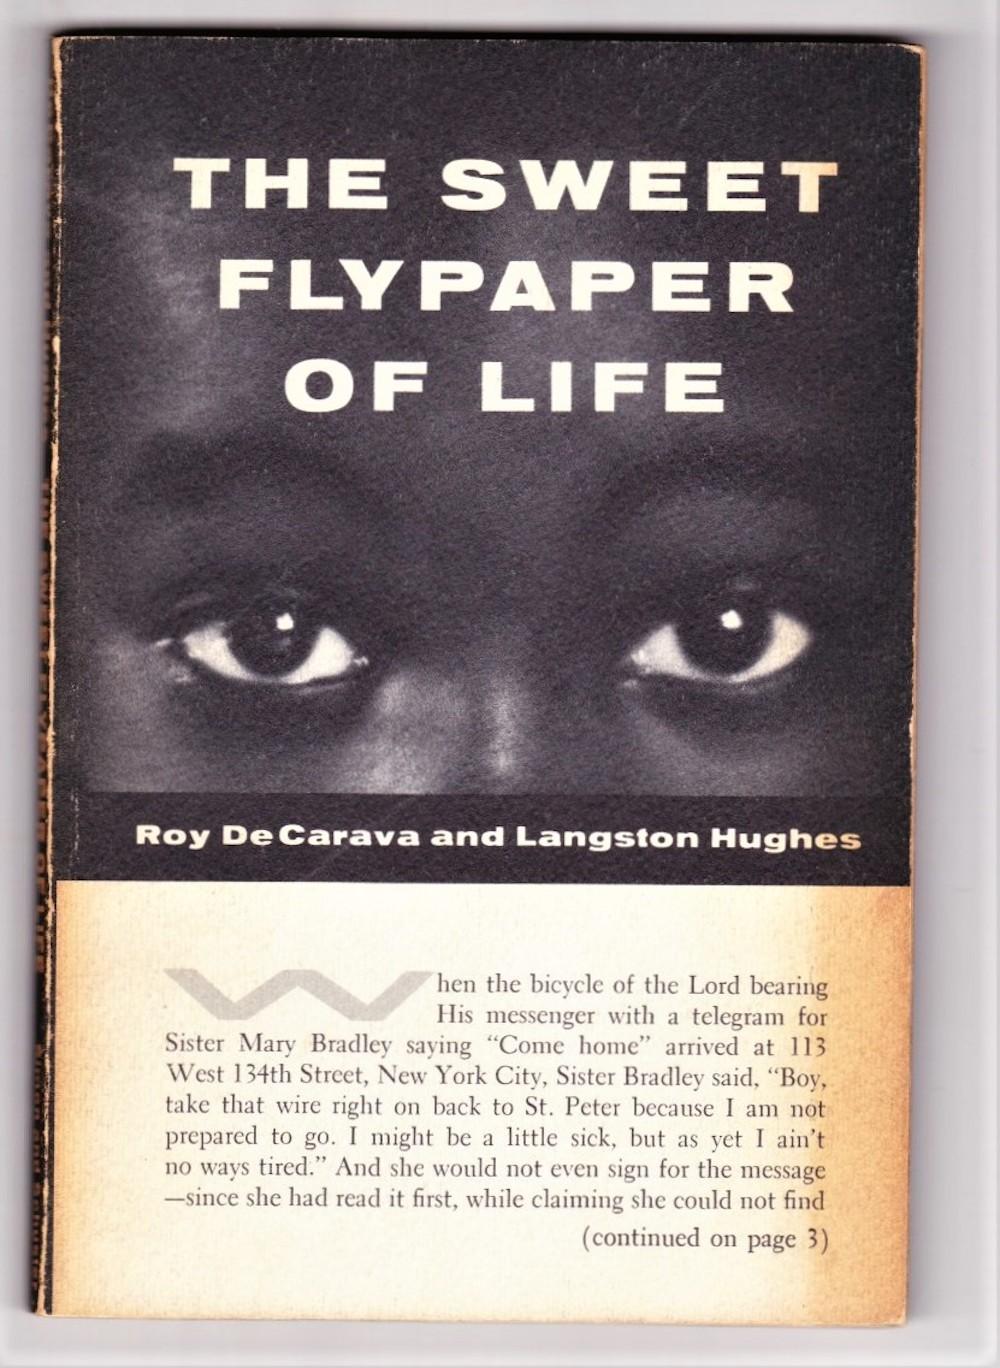 The sweet flypaper of life book cover